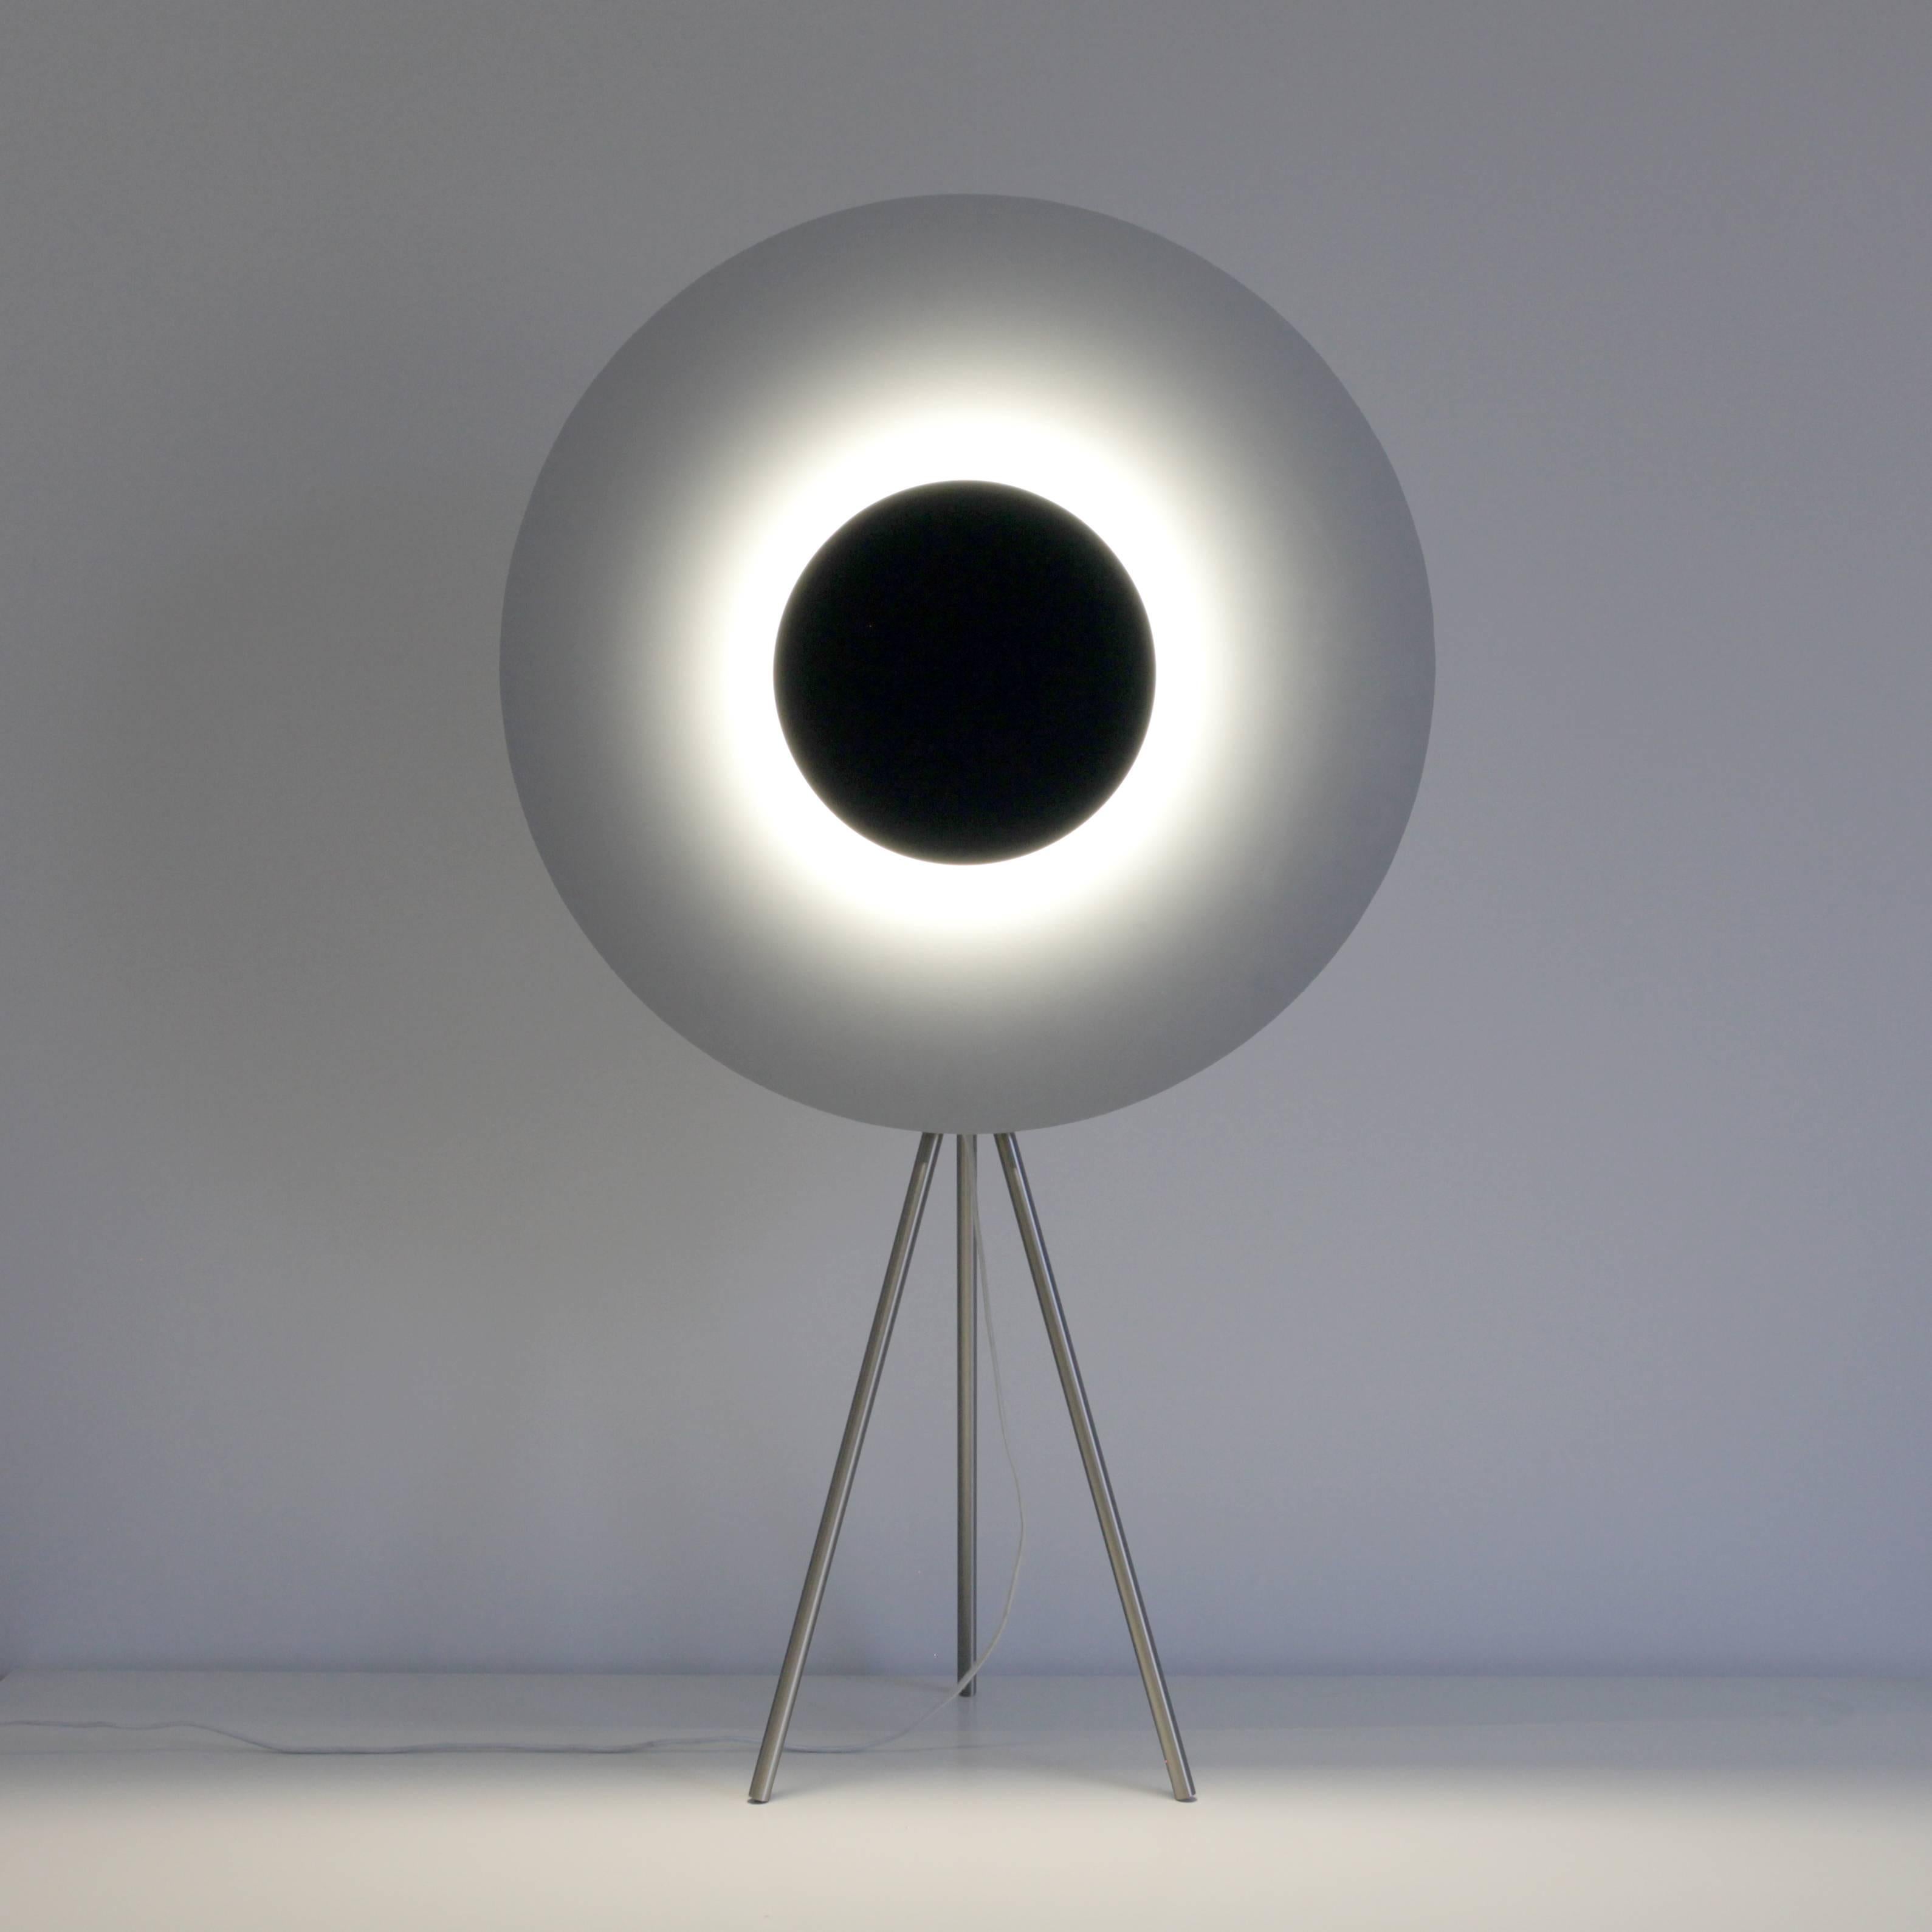 Eclipse Table Lamp by Arturo Erbsman (Handcrafted design artwork by Arturo Erbsman)
Limited edition, signed and numbered
Dimensions: 85 x 49 x 23 cm
Materials: anodized aluminum disc, mirror, LED spotlight, wood, steel base

All our lamps can be